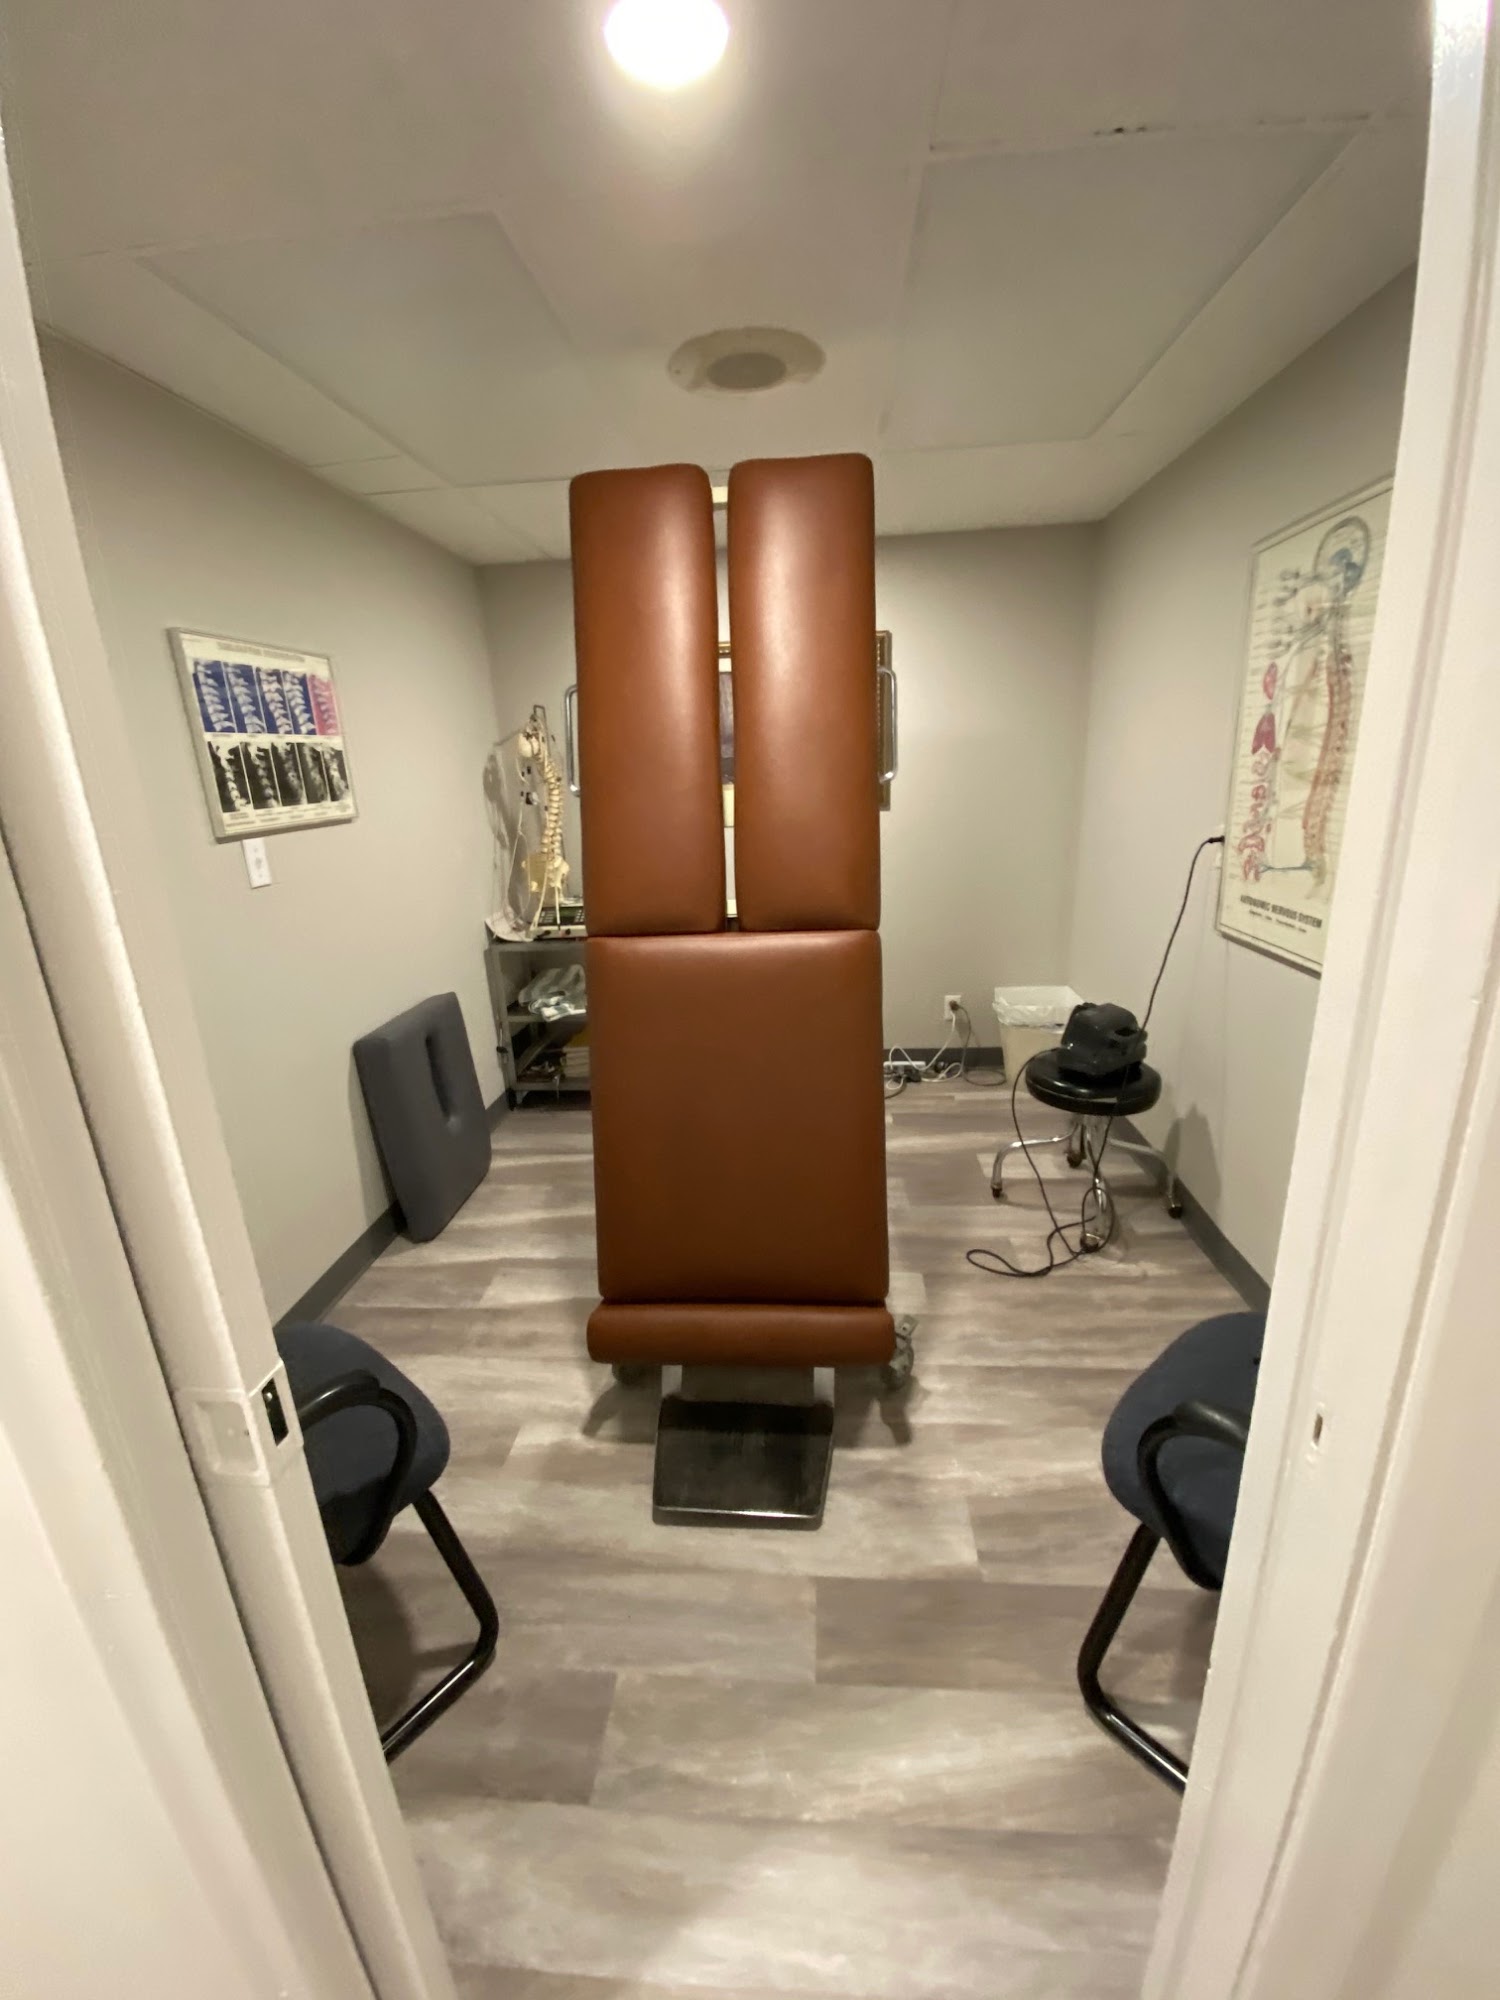 Metrowest Spine Clinic